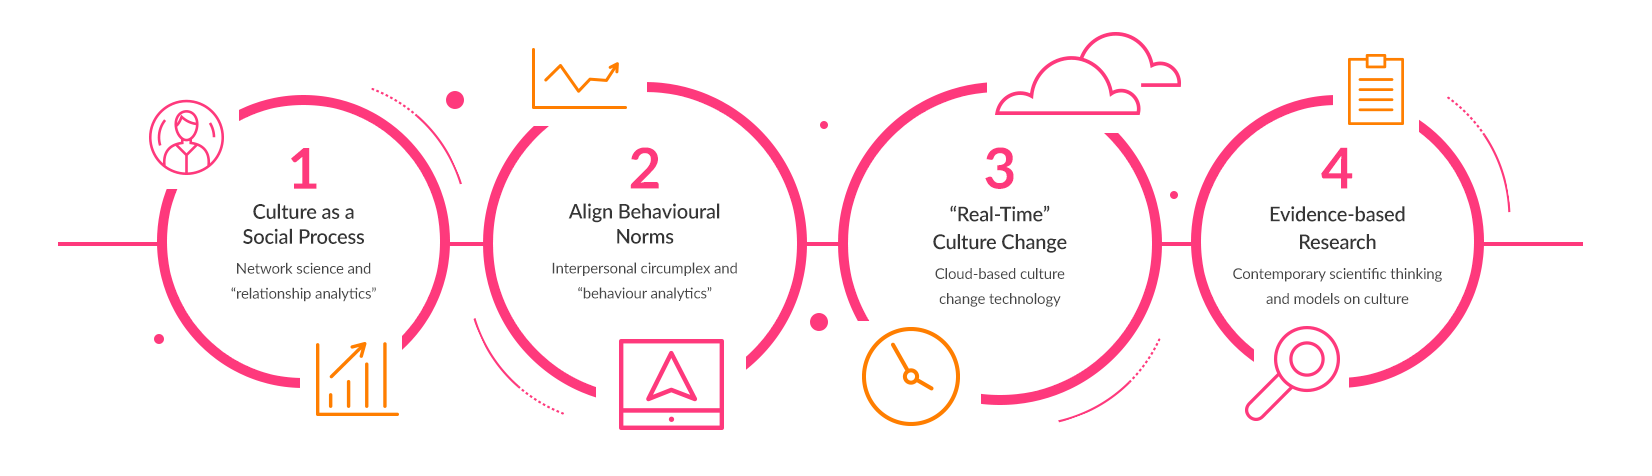 culture change infographic